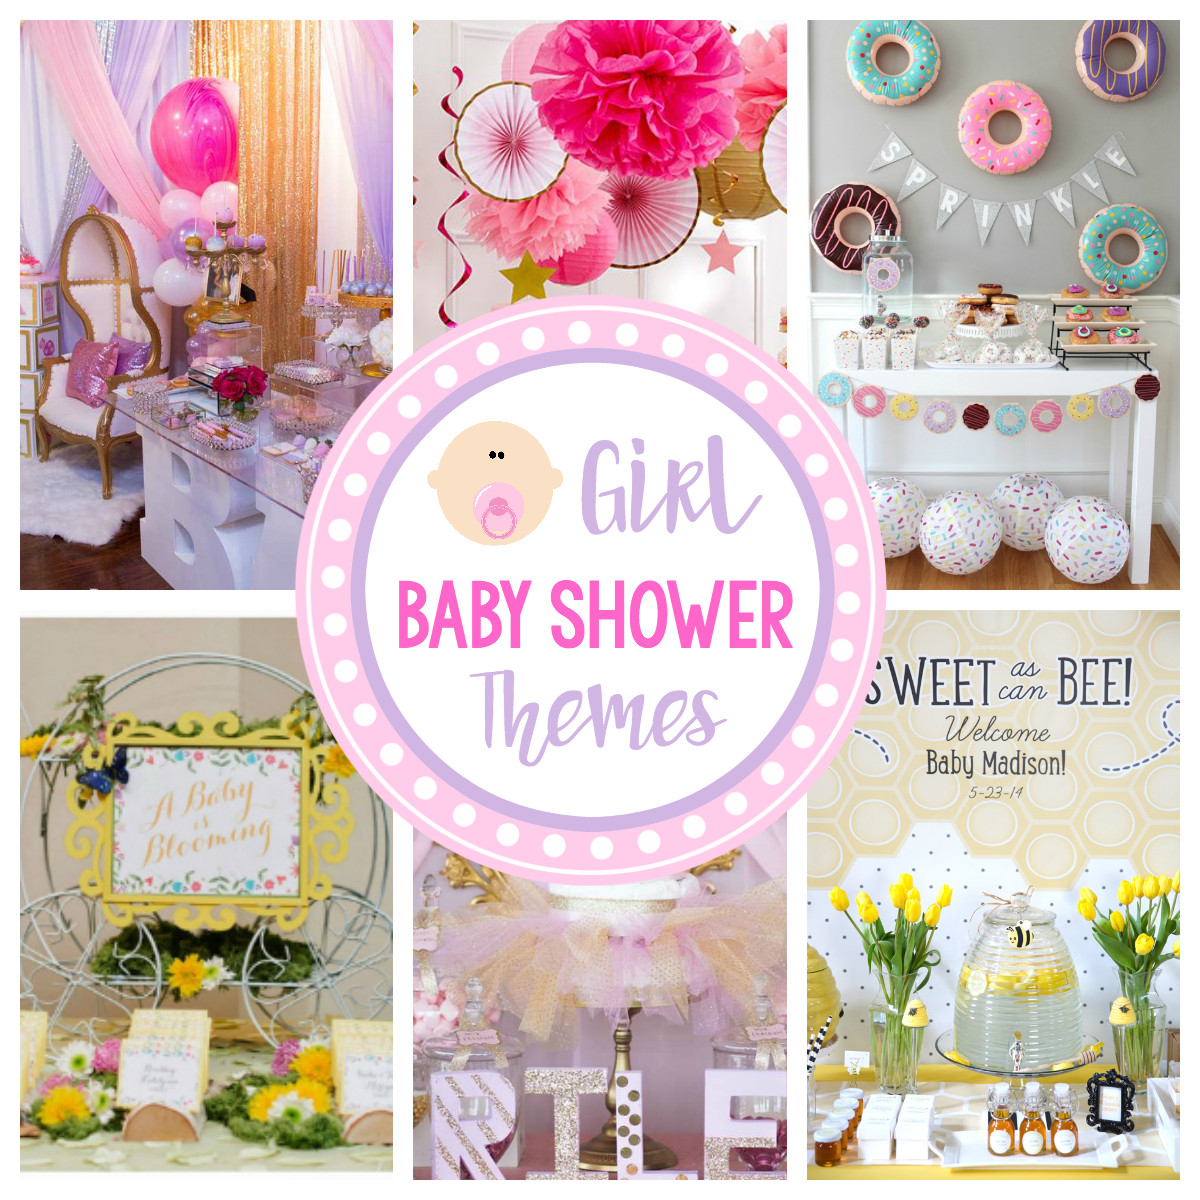 Baby Shower Girl Ideas Decorations
 Cute Girl Baby Shower Themes & Ideas – Fun Squared